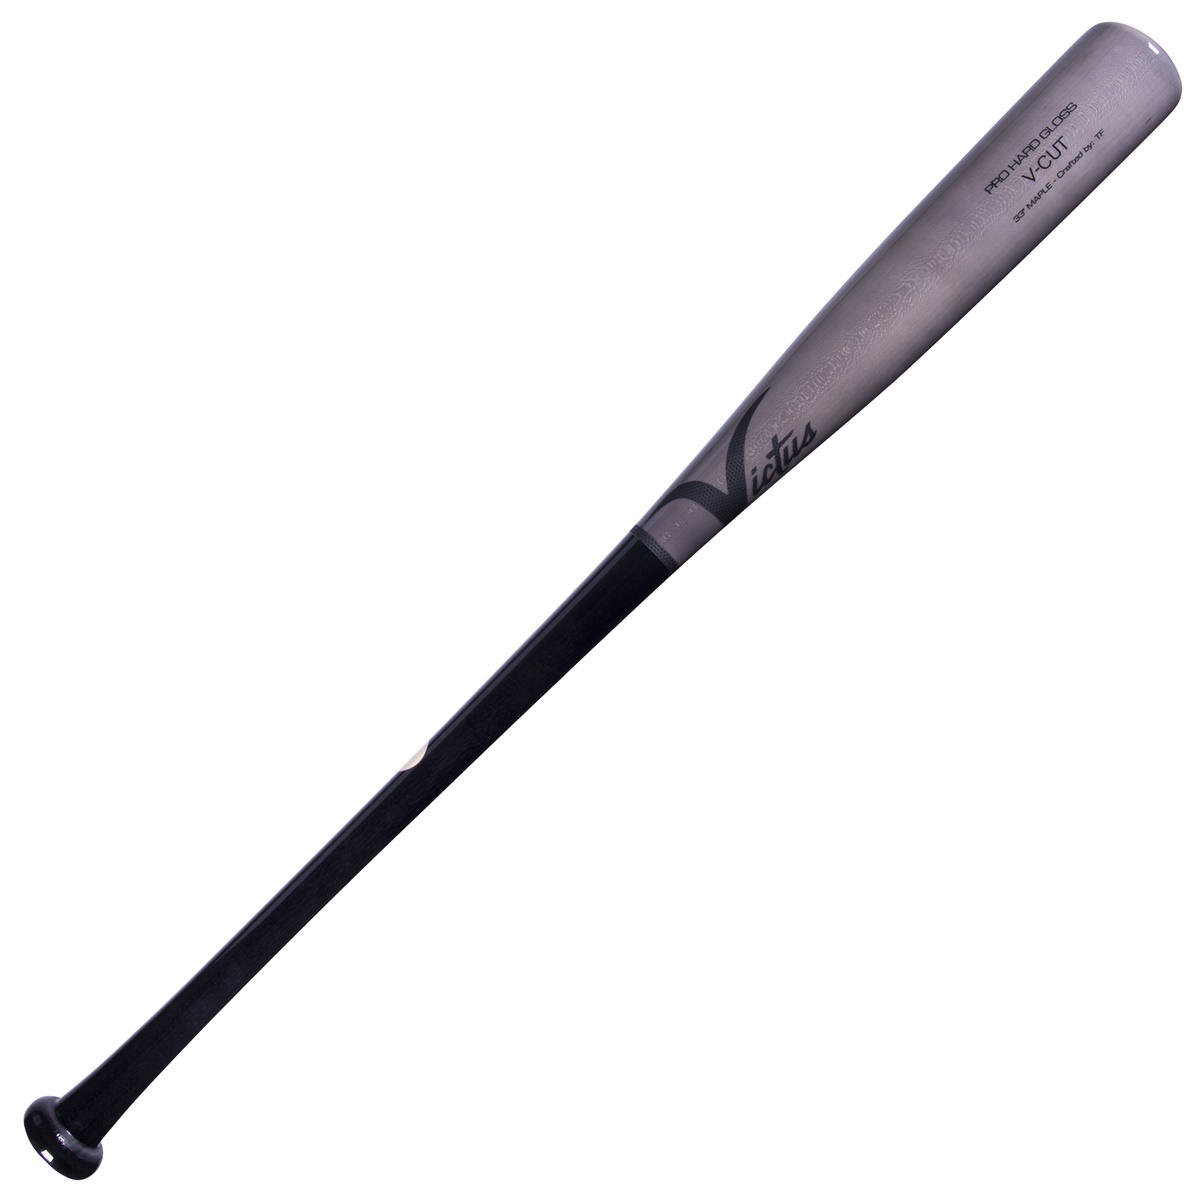 victus-v-cut-pro-cut-black-grey-gloss-wood-baseball-bat-33-inch VGPC-BKGY-33 Victus 840078703423 V-Cuts were destined for the pros with the same quality wood